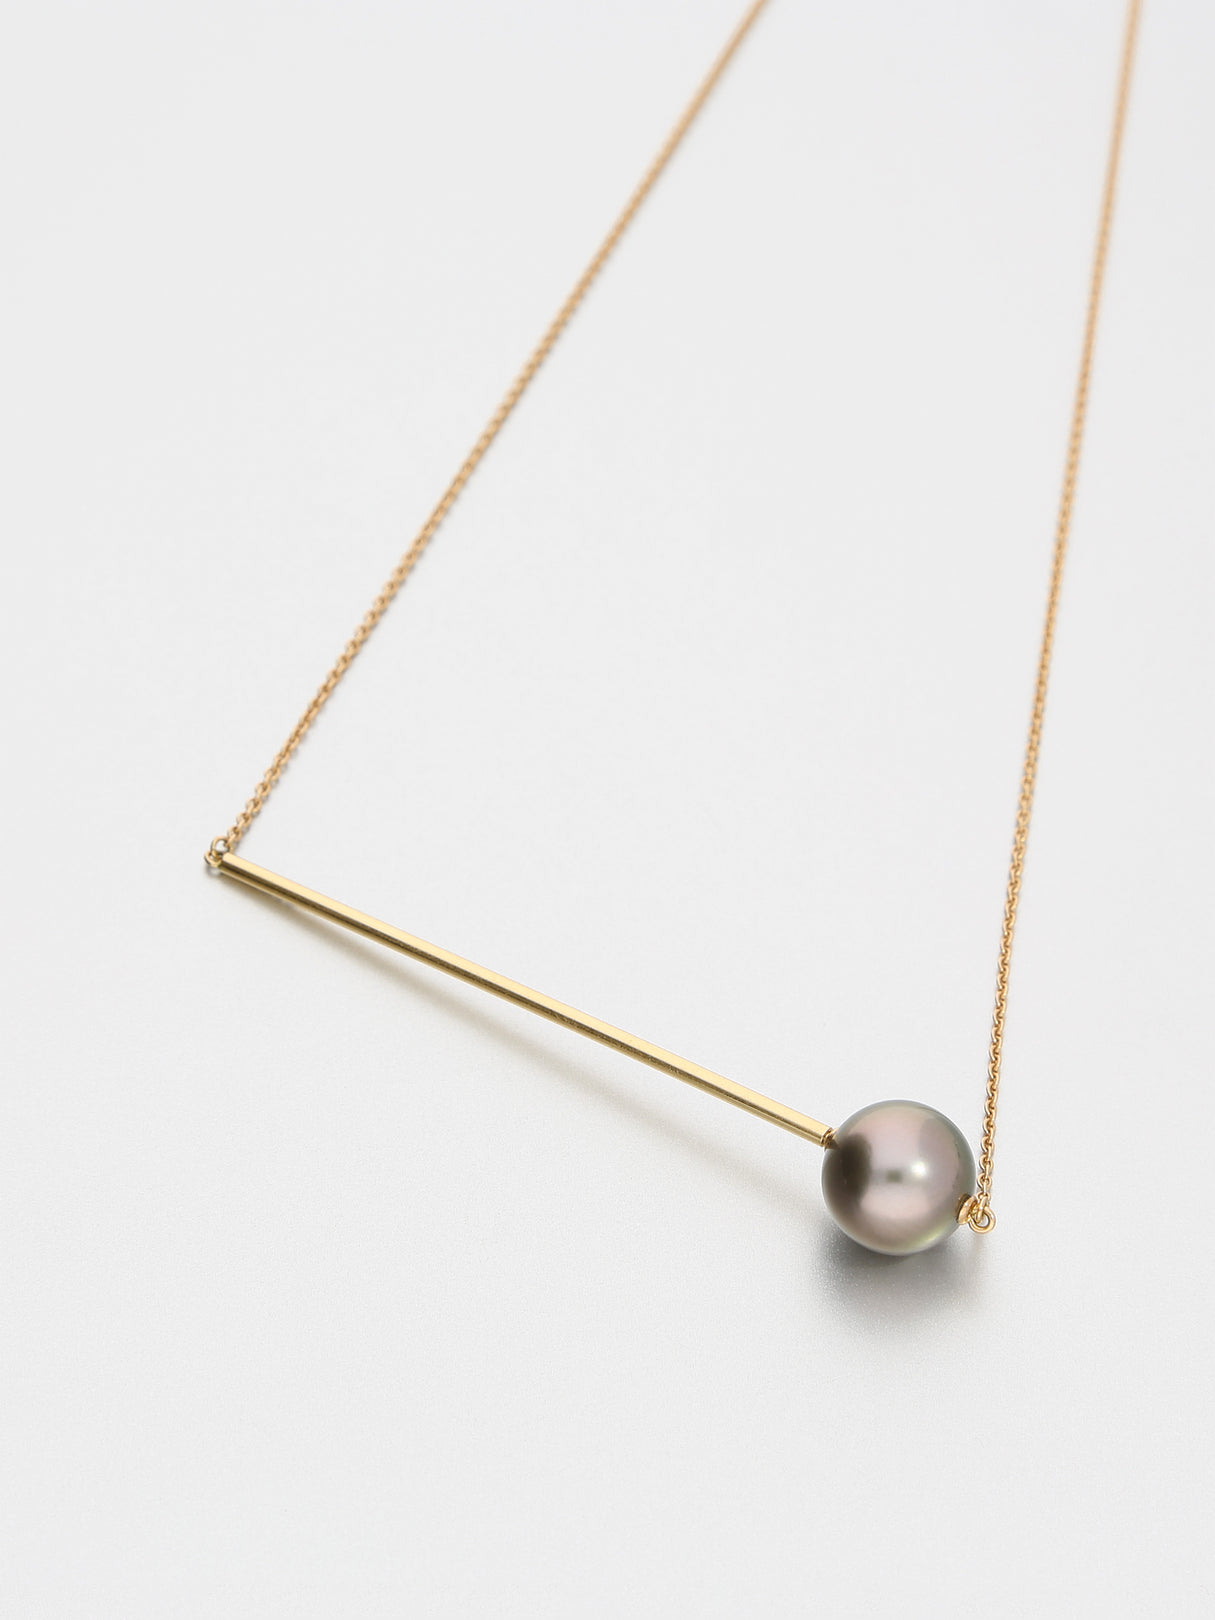 Abacus Pearl Necklace, Rose gold with dark Tahitian pearl 11mm